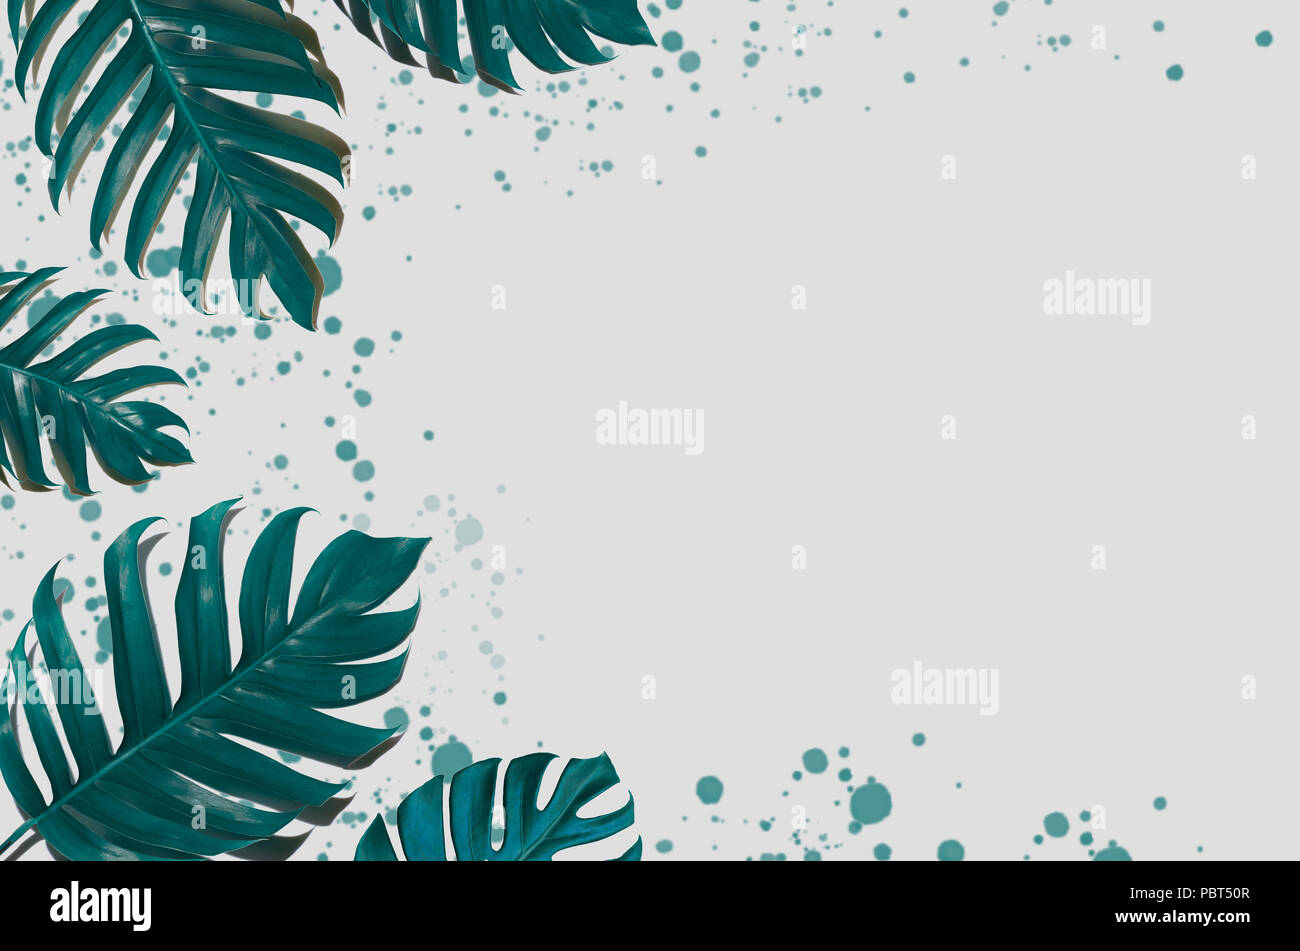 Concept art Minimal background design Leaves monster blue Tropical and leaves in vibrant bold gradient trendy Summer Tropical Leaves Design Stock Photo